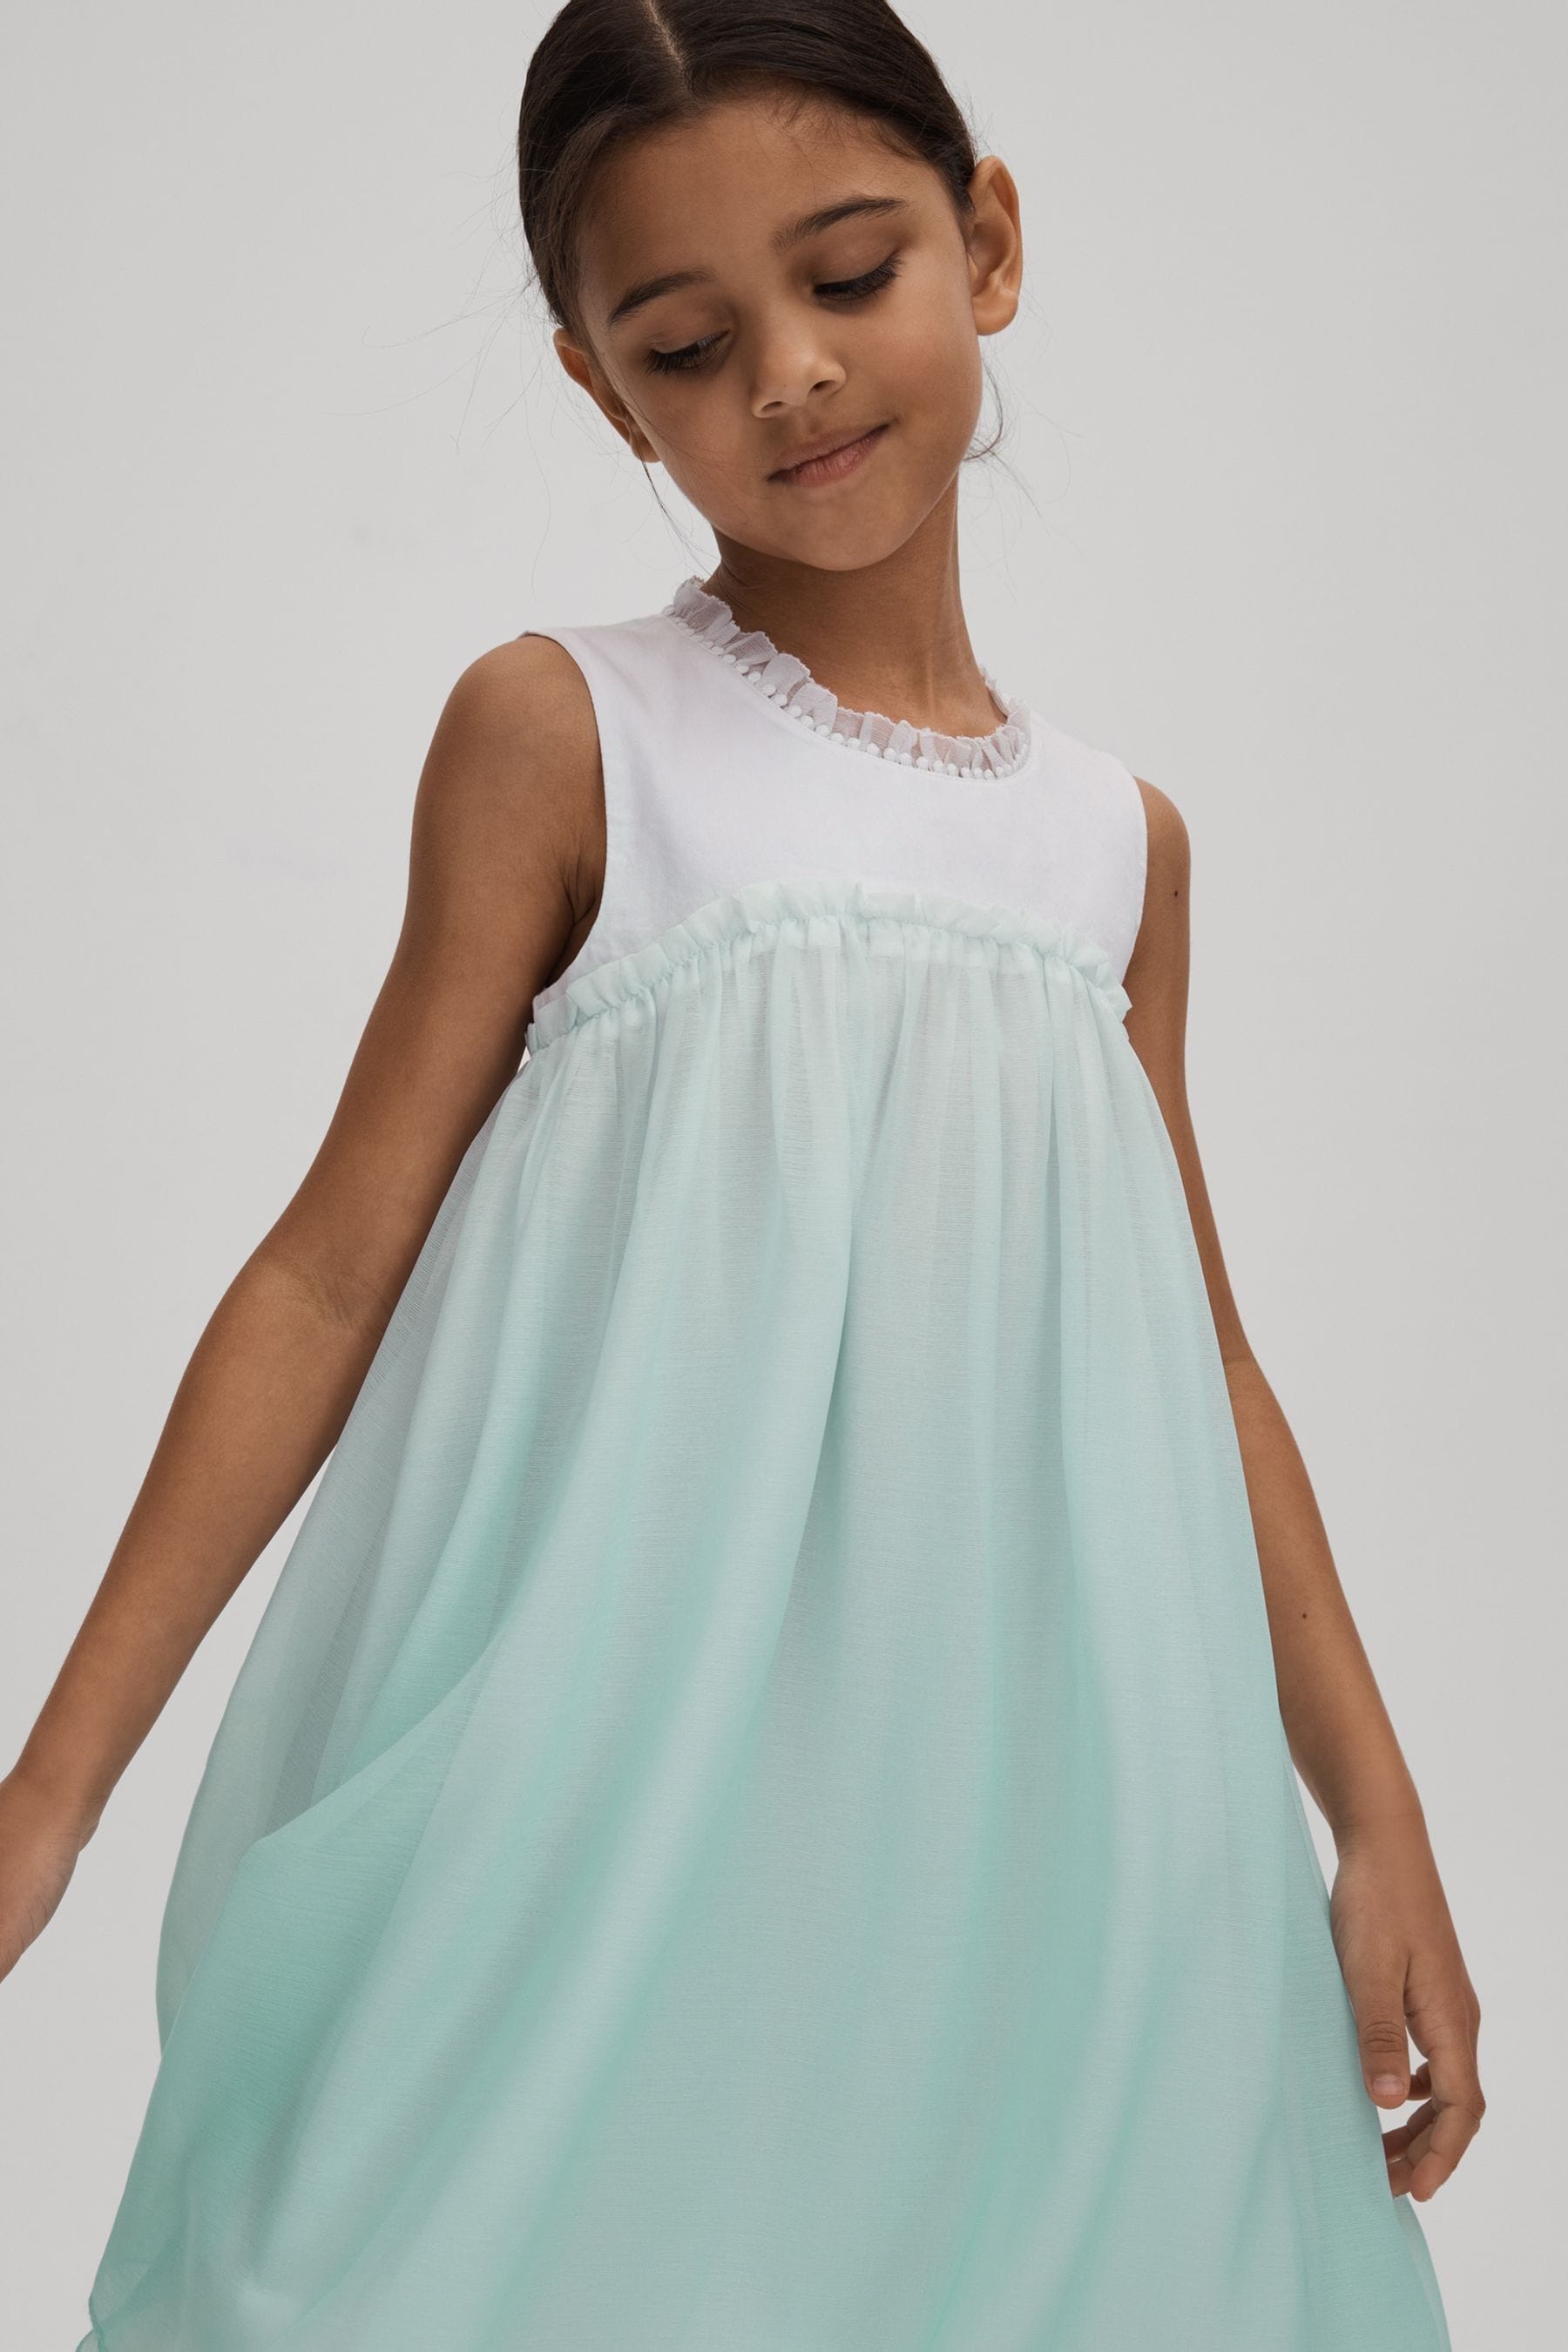 Reiss Kids' Coco - Blue Senior Ombre Tulle Dress, 9 In Neutral